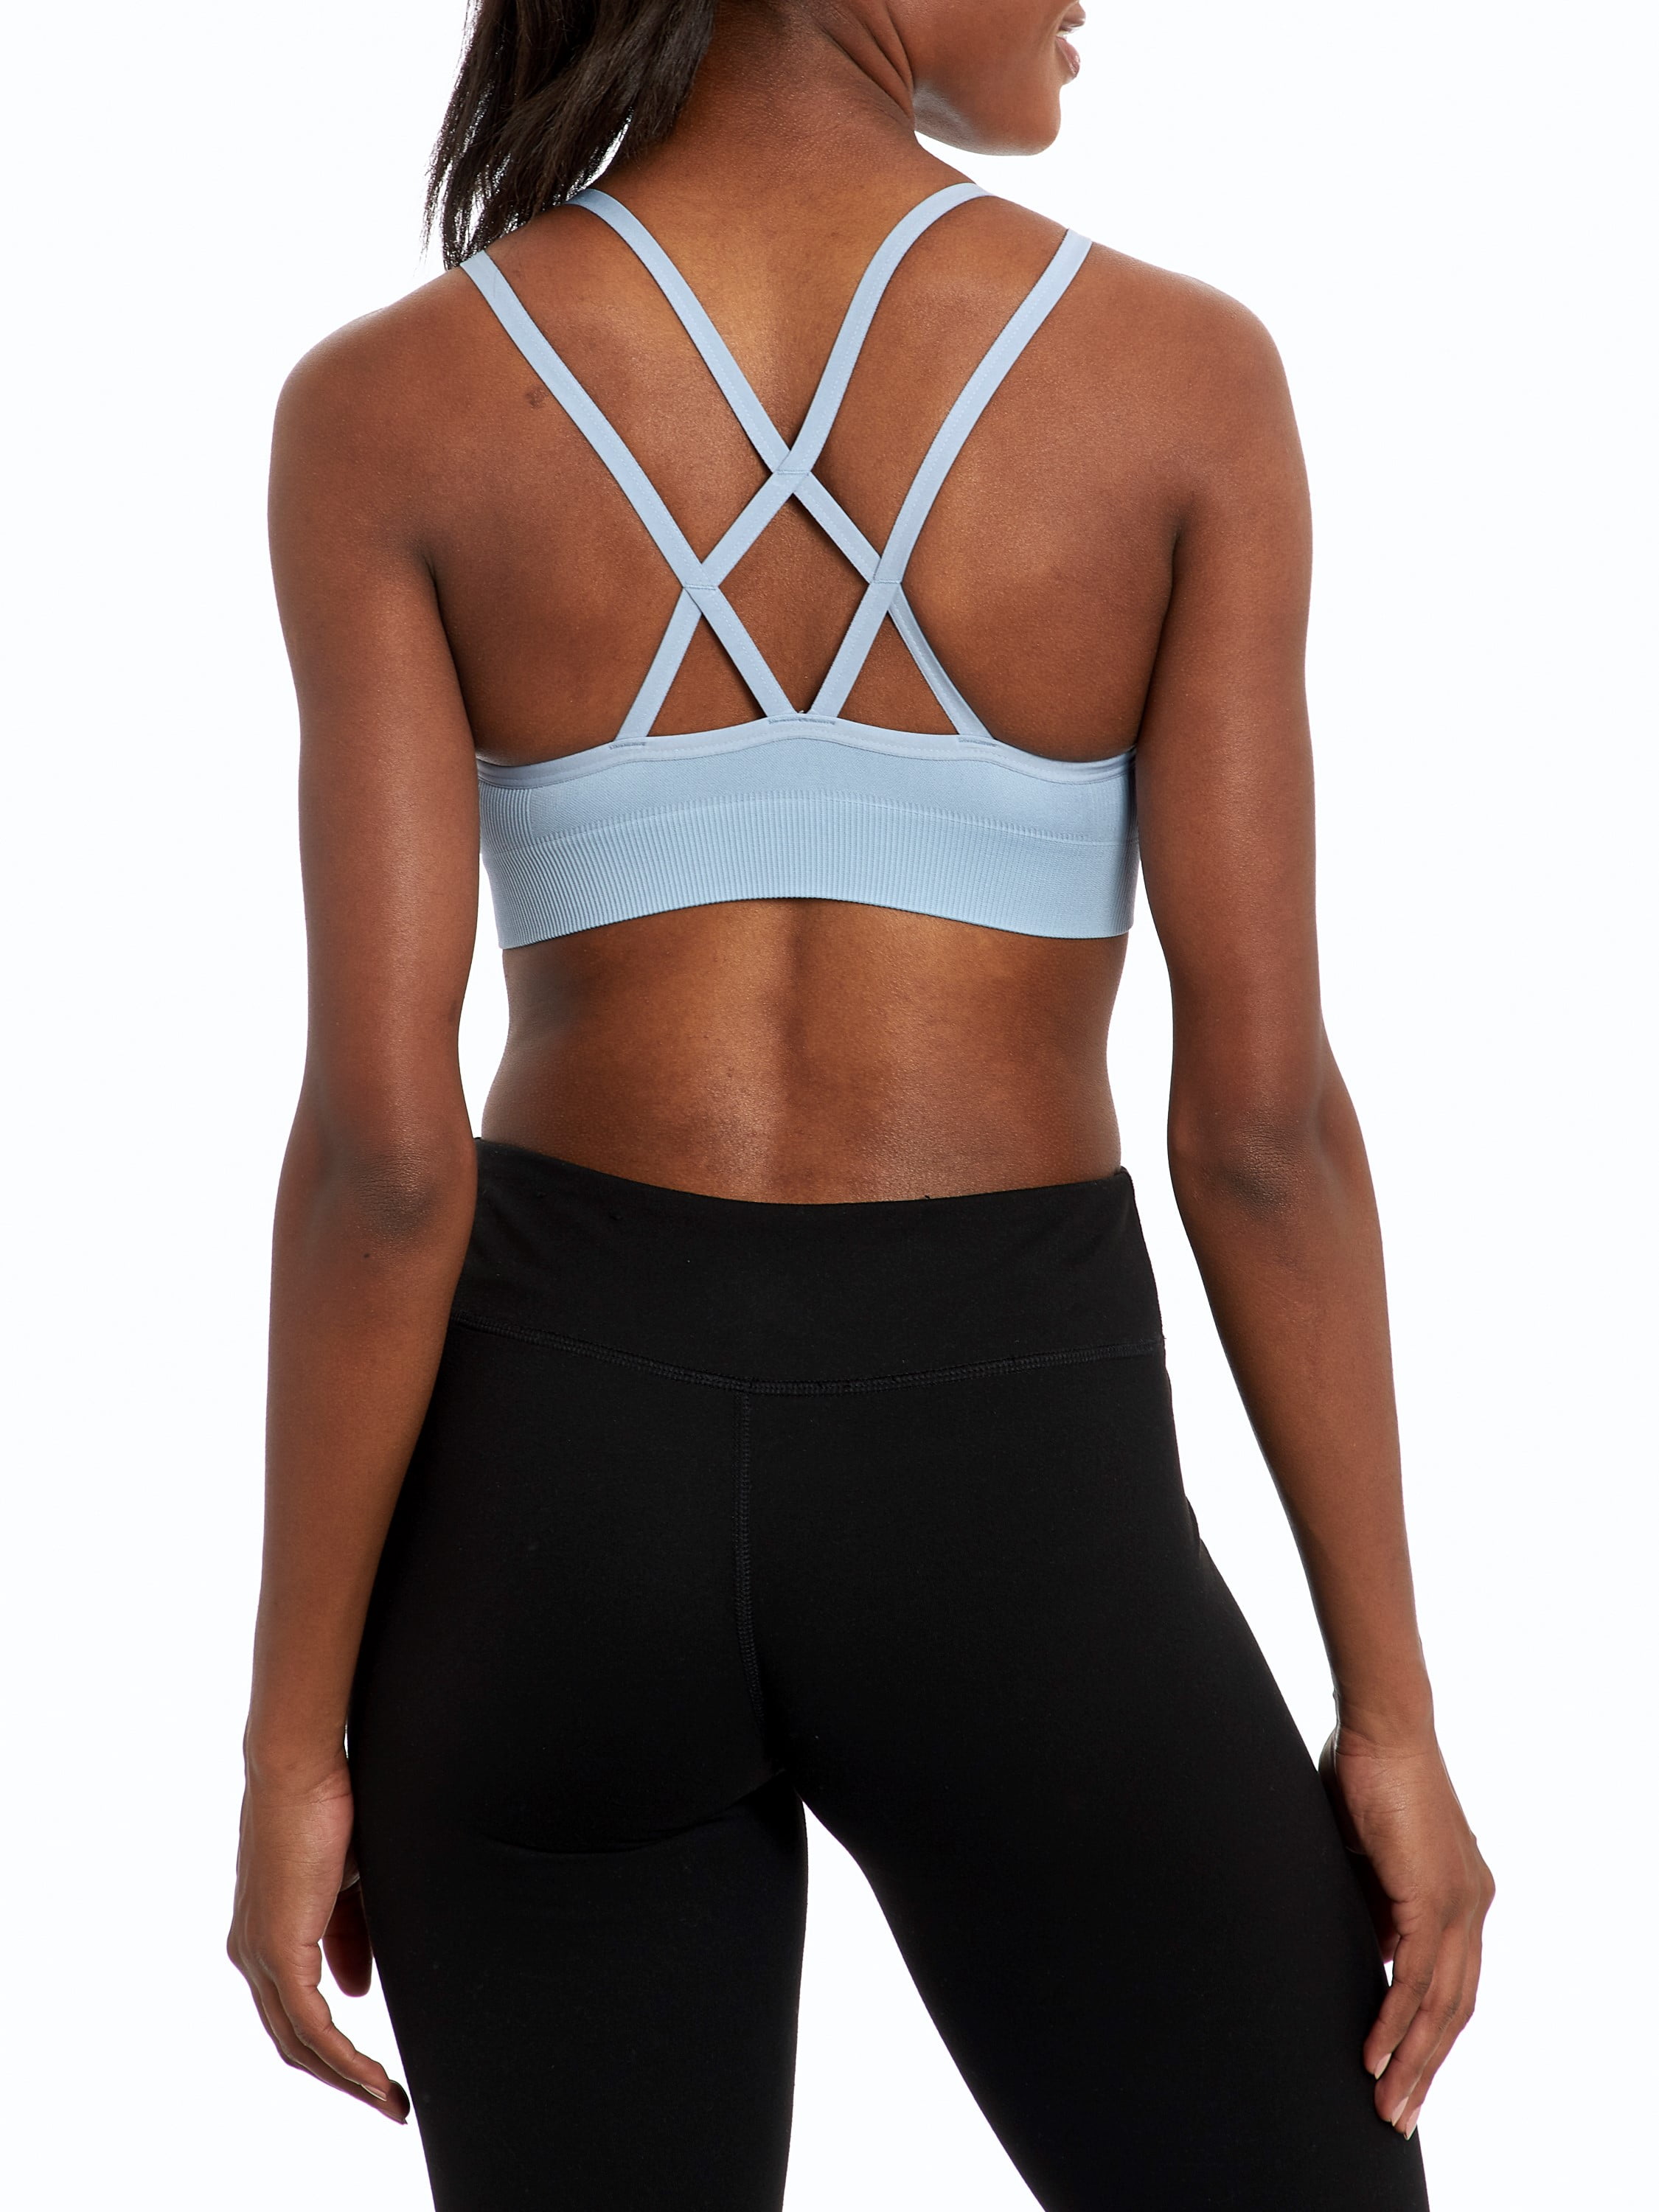 Bally Total Fitness Women's Lily Seamless Sports Bra-2 Pack